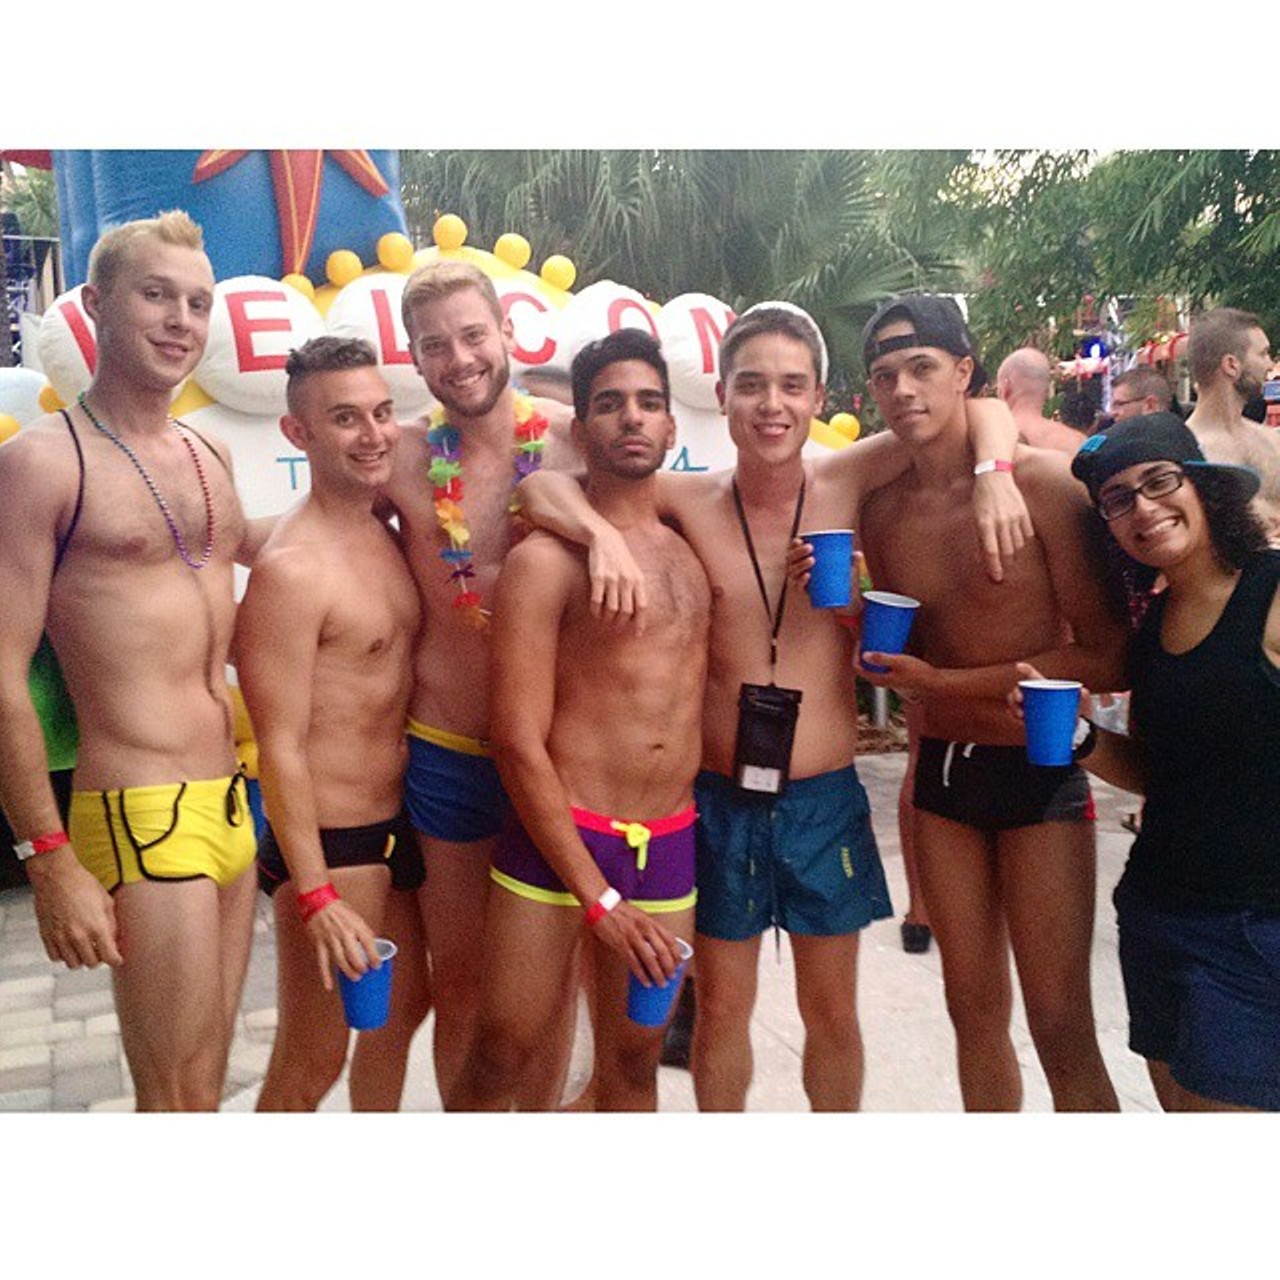 The very best Speedos, short shorts and swim trunks from #GayDays and #OMW 2015